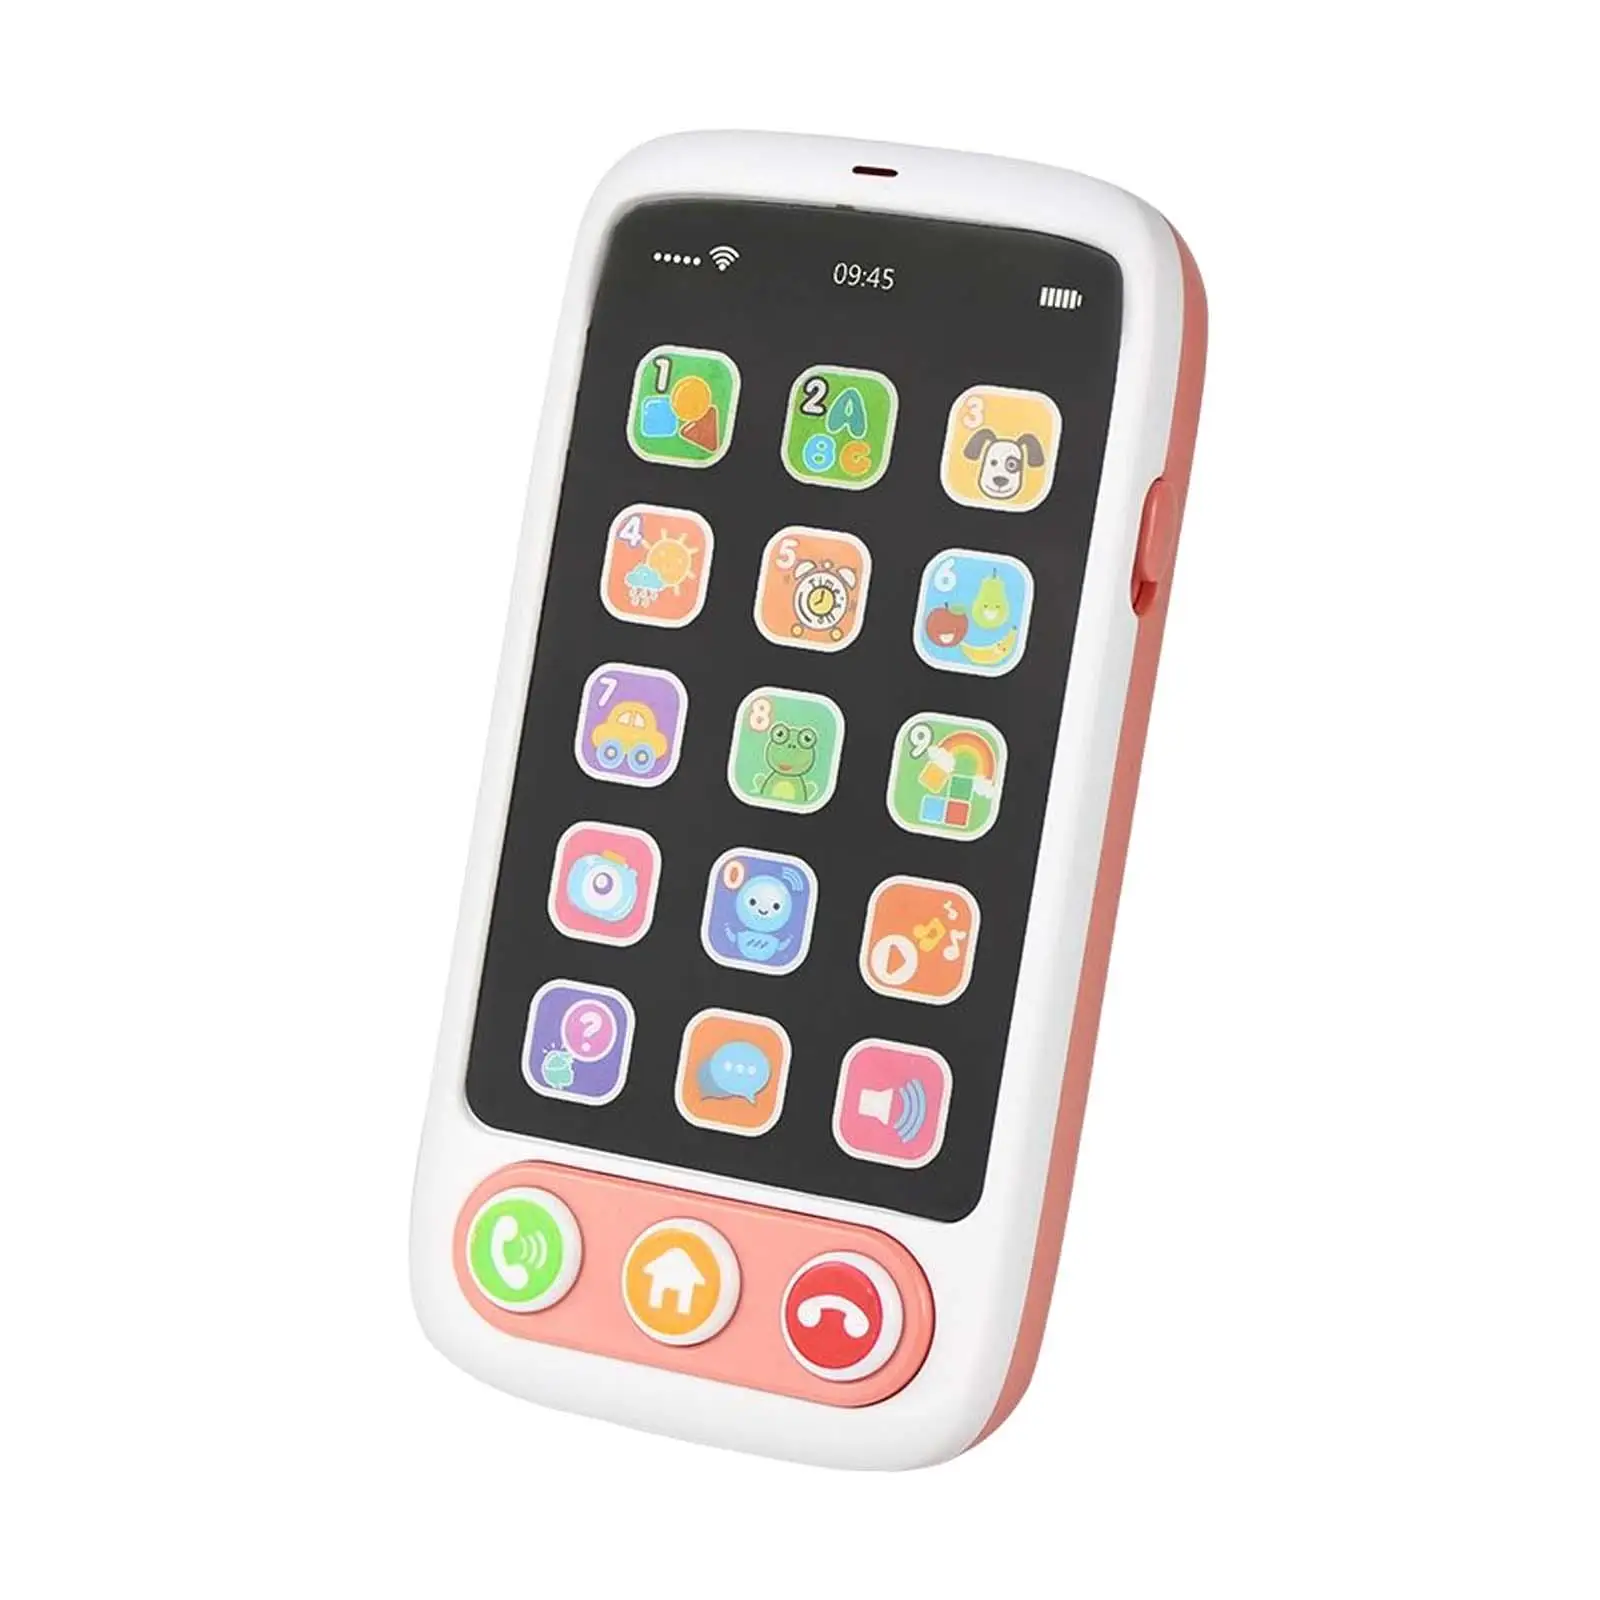 Portable Mini Phone Toys Mobile Telephone Toy Smartphone Toy for Girls Kids Gift